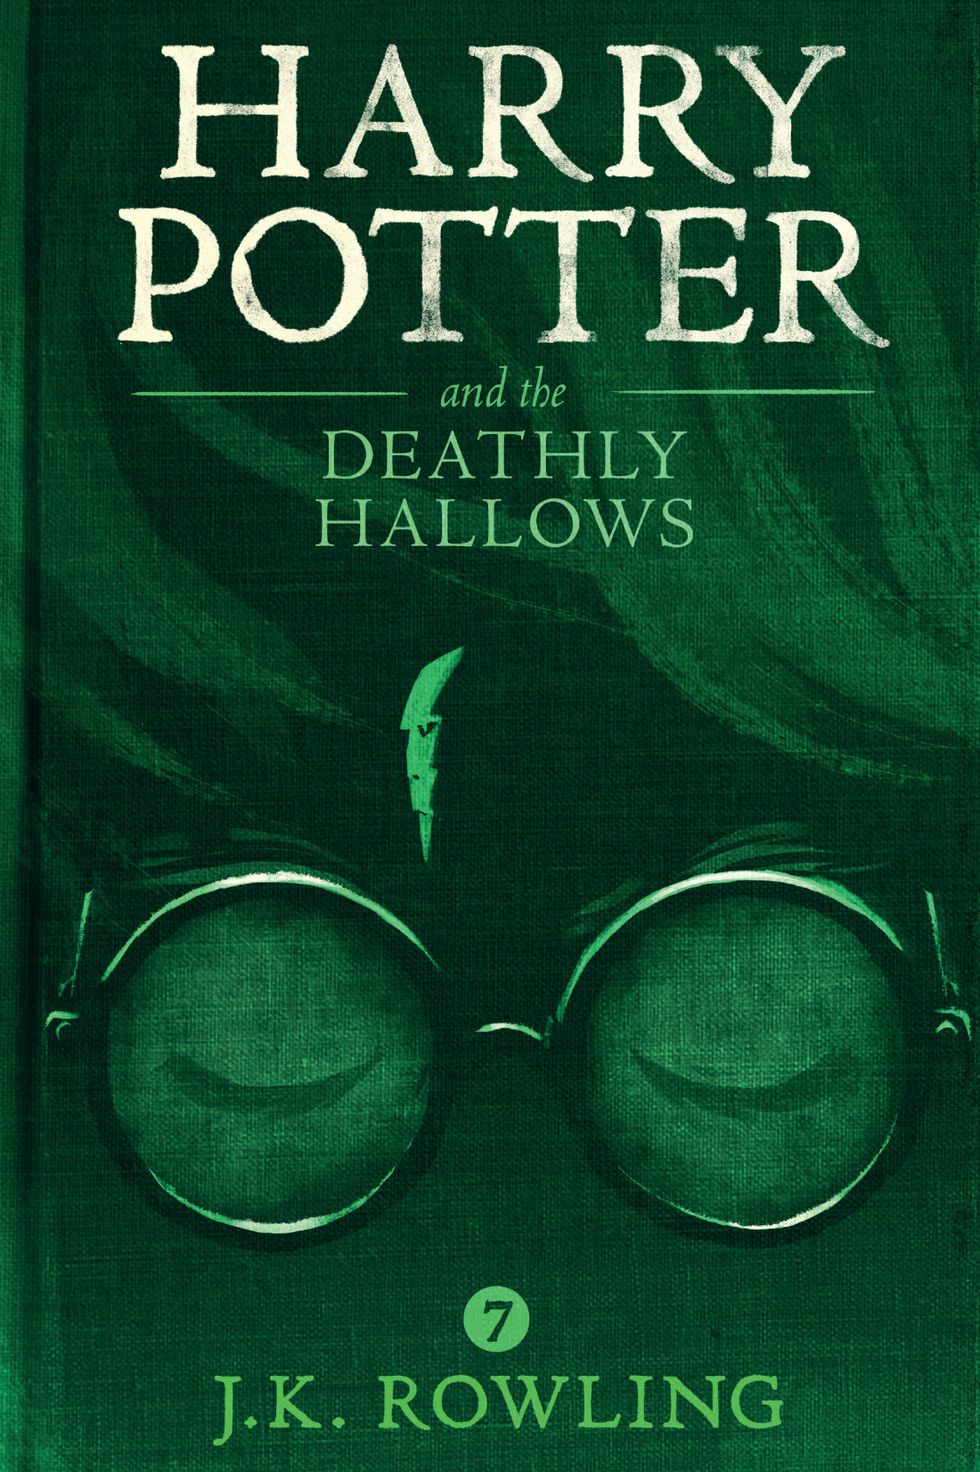 These new digital Harry Potter book covers designed by Olly Moss